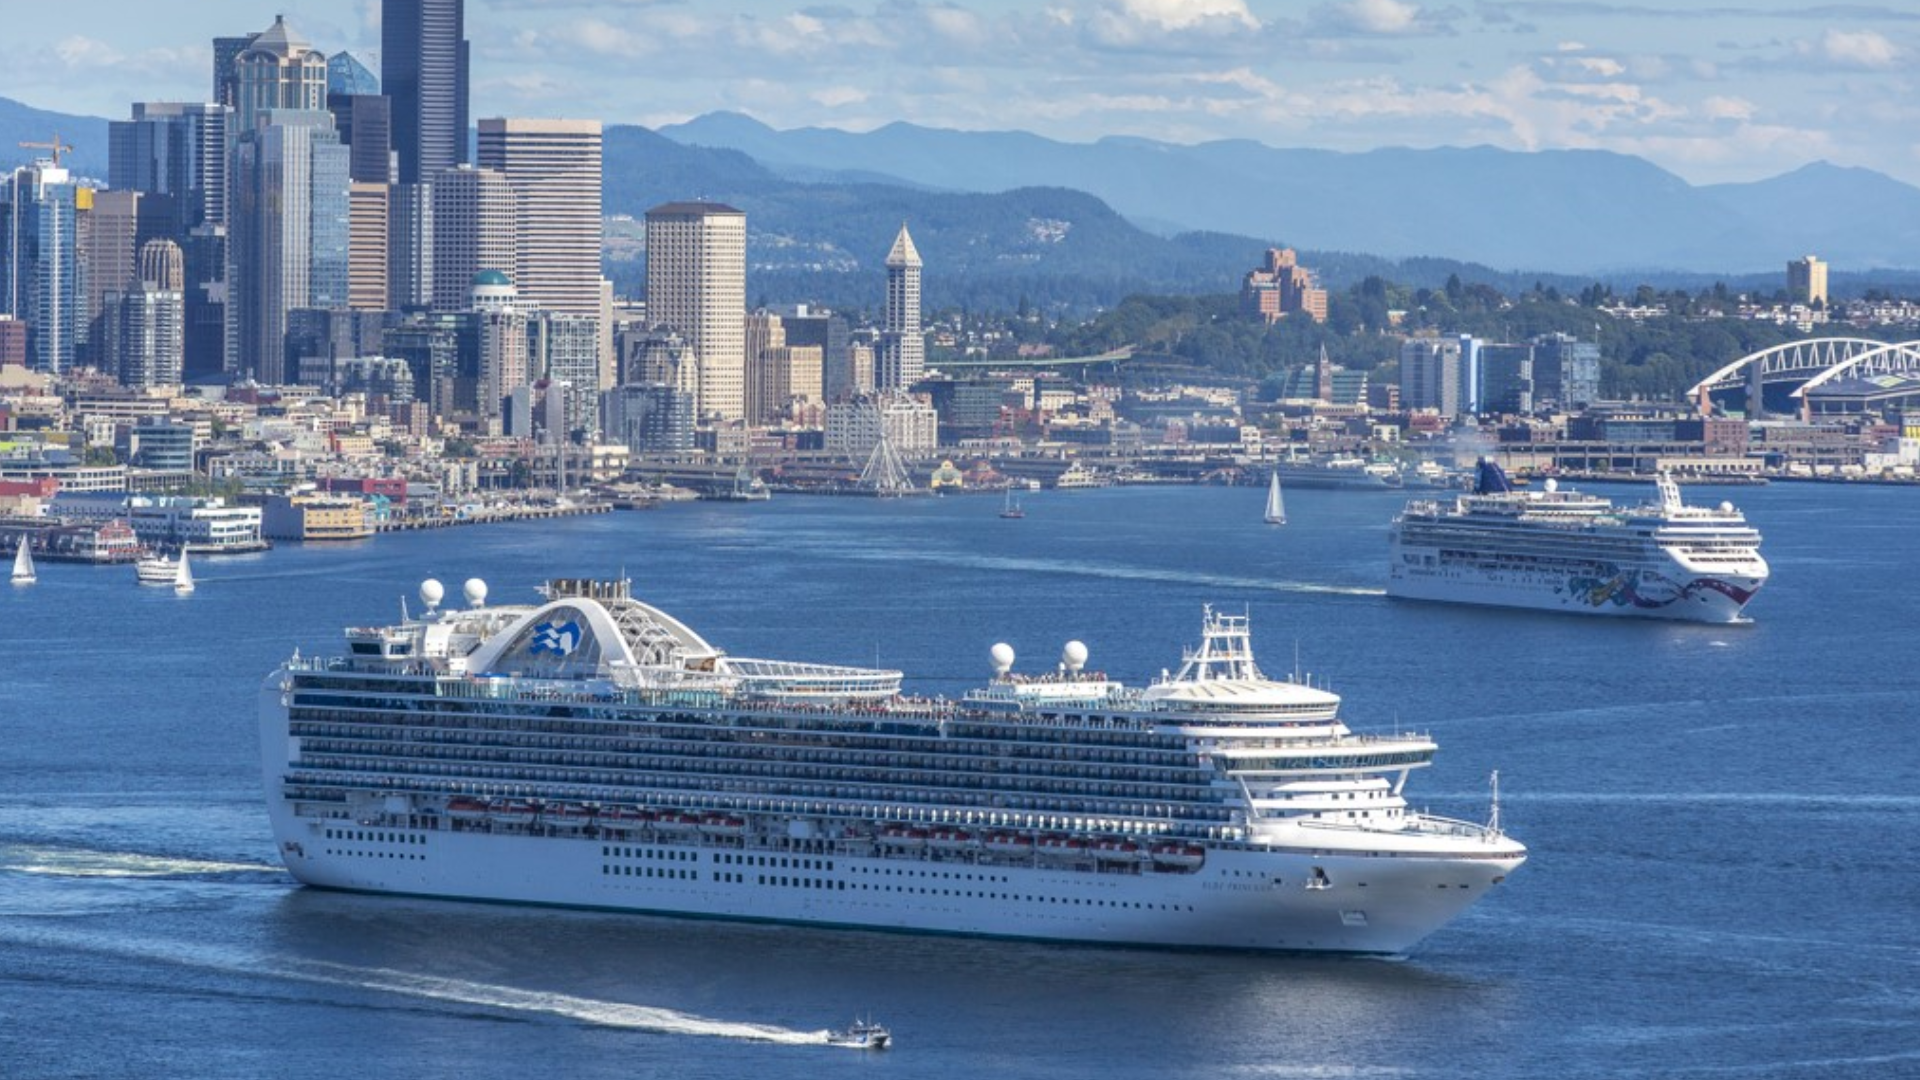 Wave Season is the time to snag awesome deals for cruises around the world. Sponsored by AAA Washington